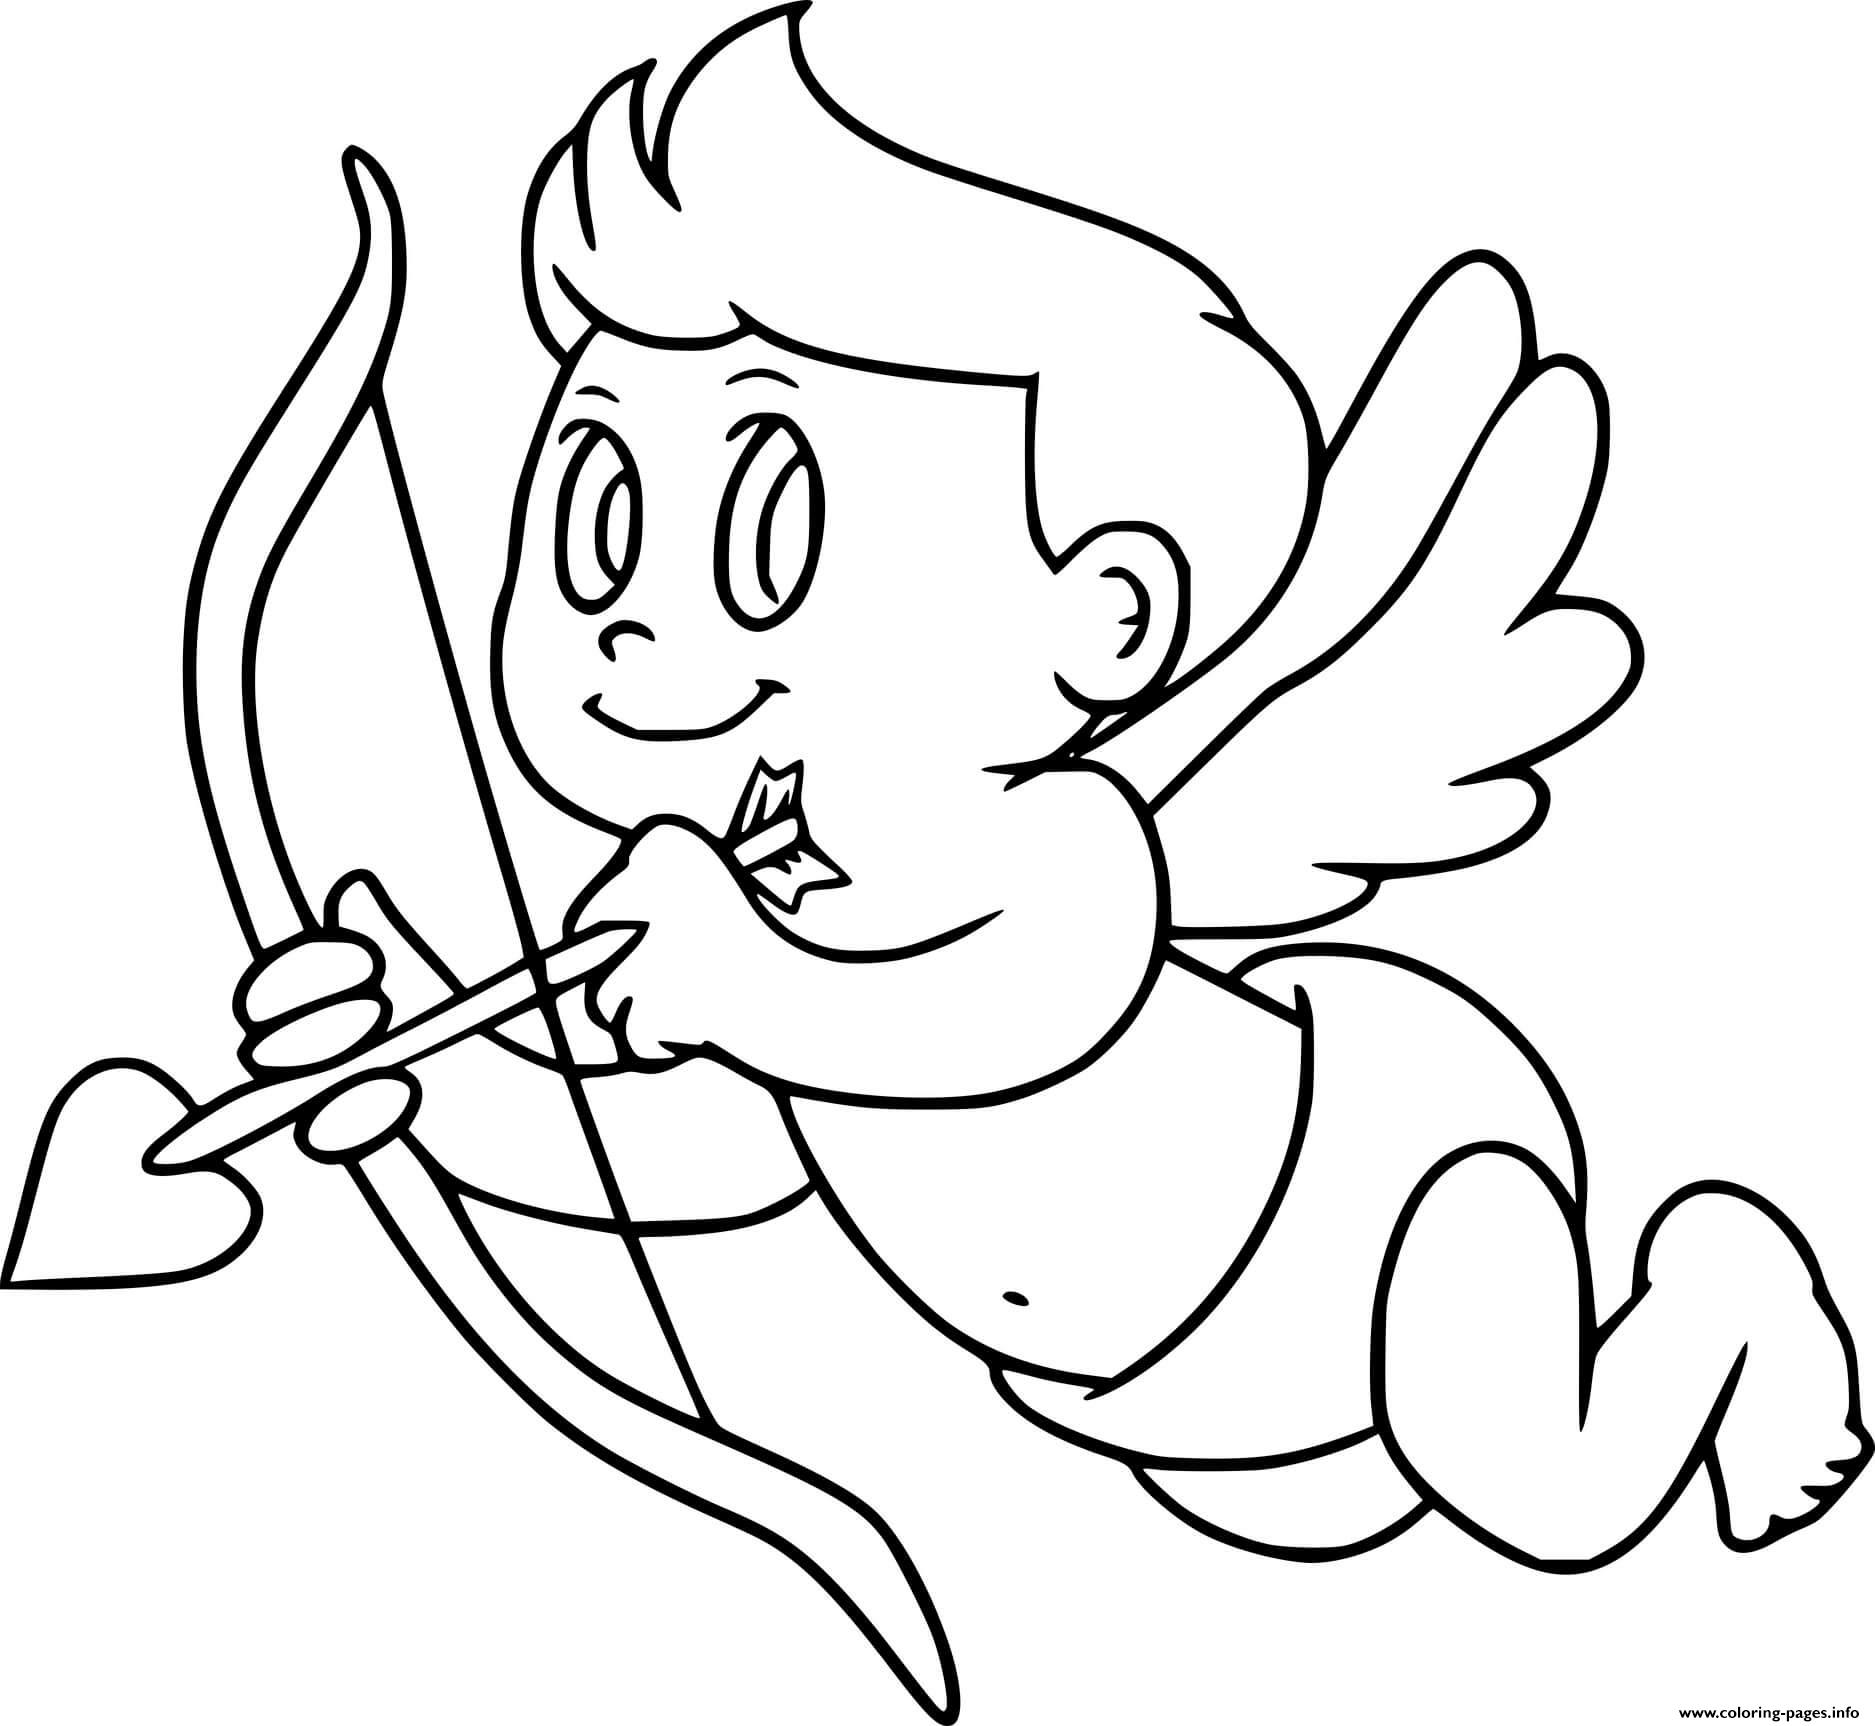 Little Cupid coloring